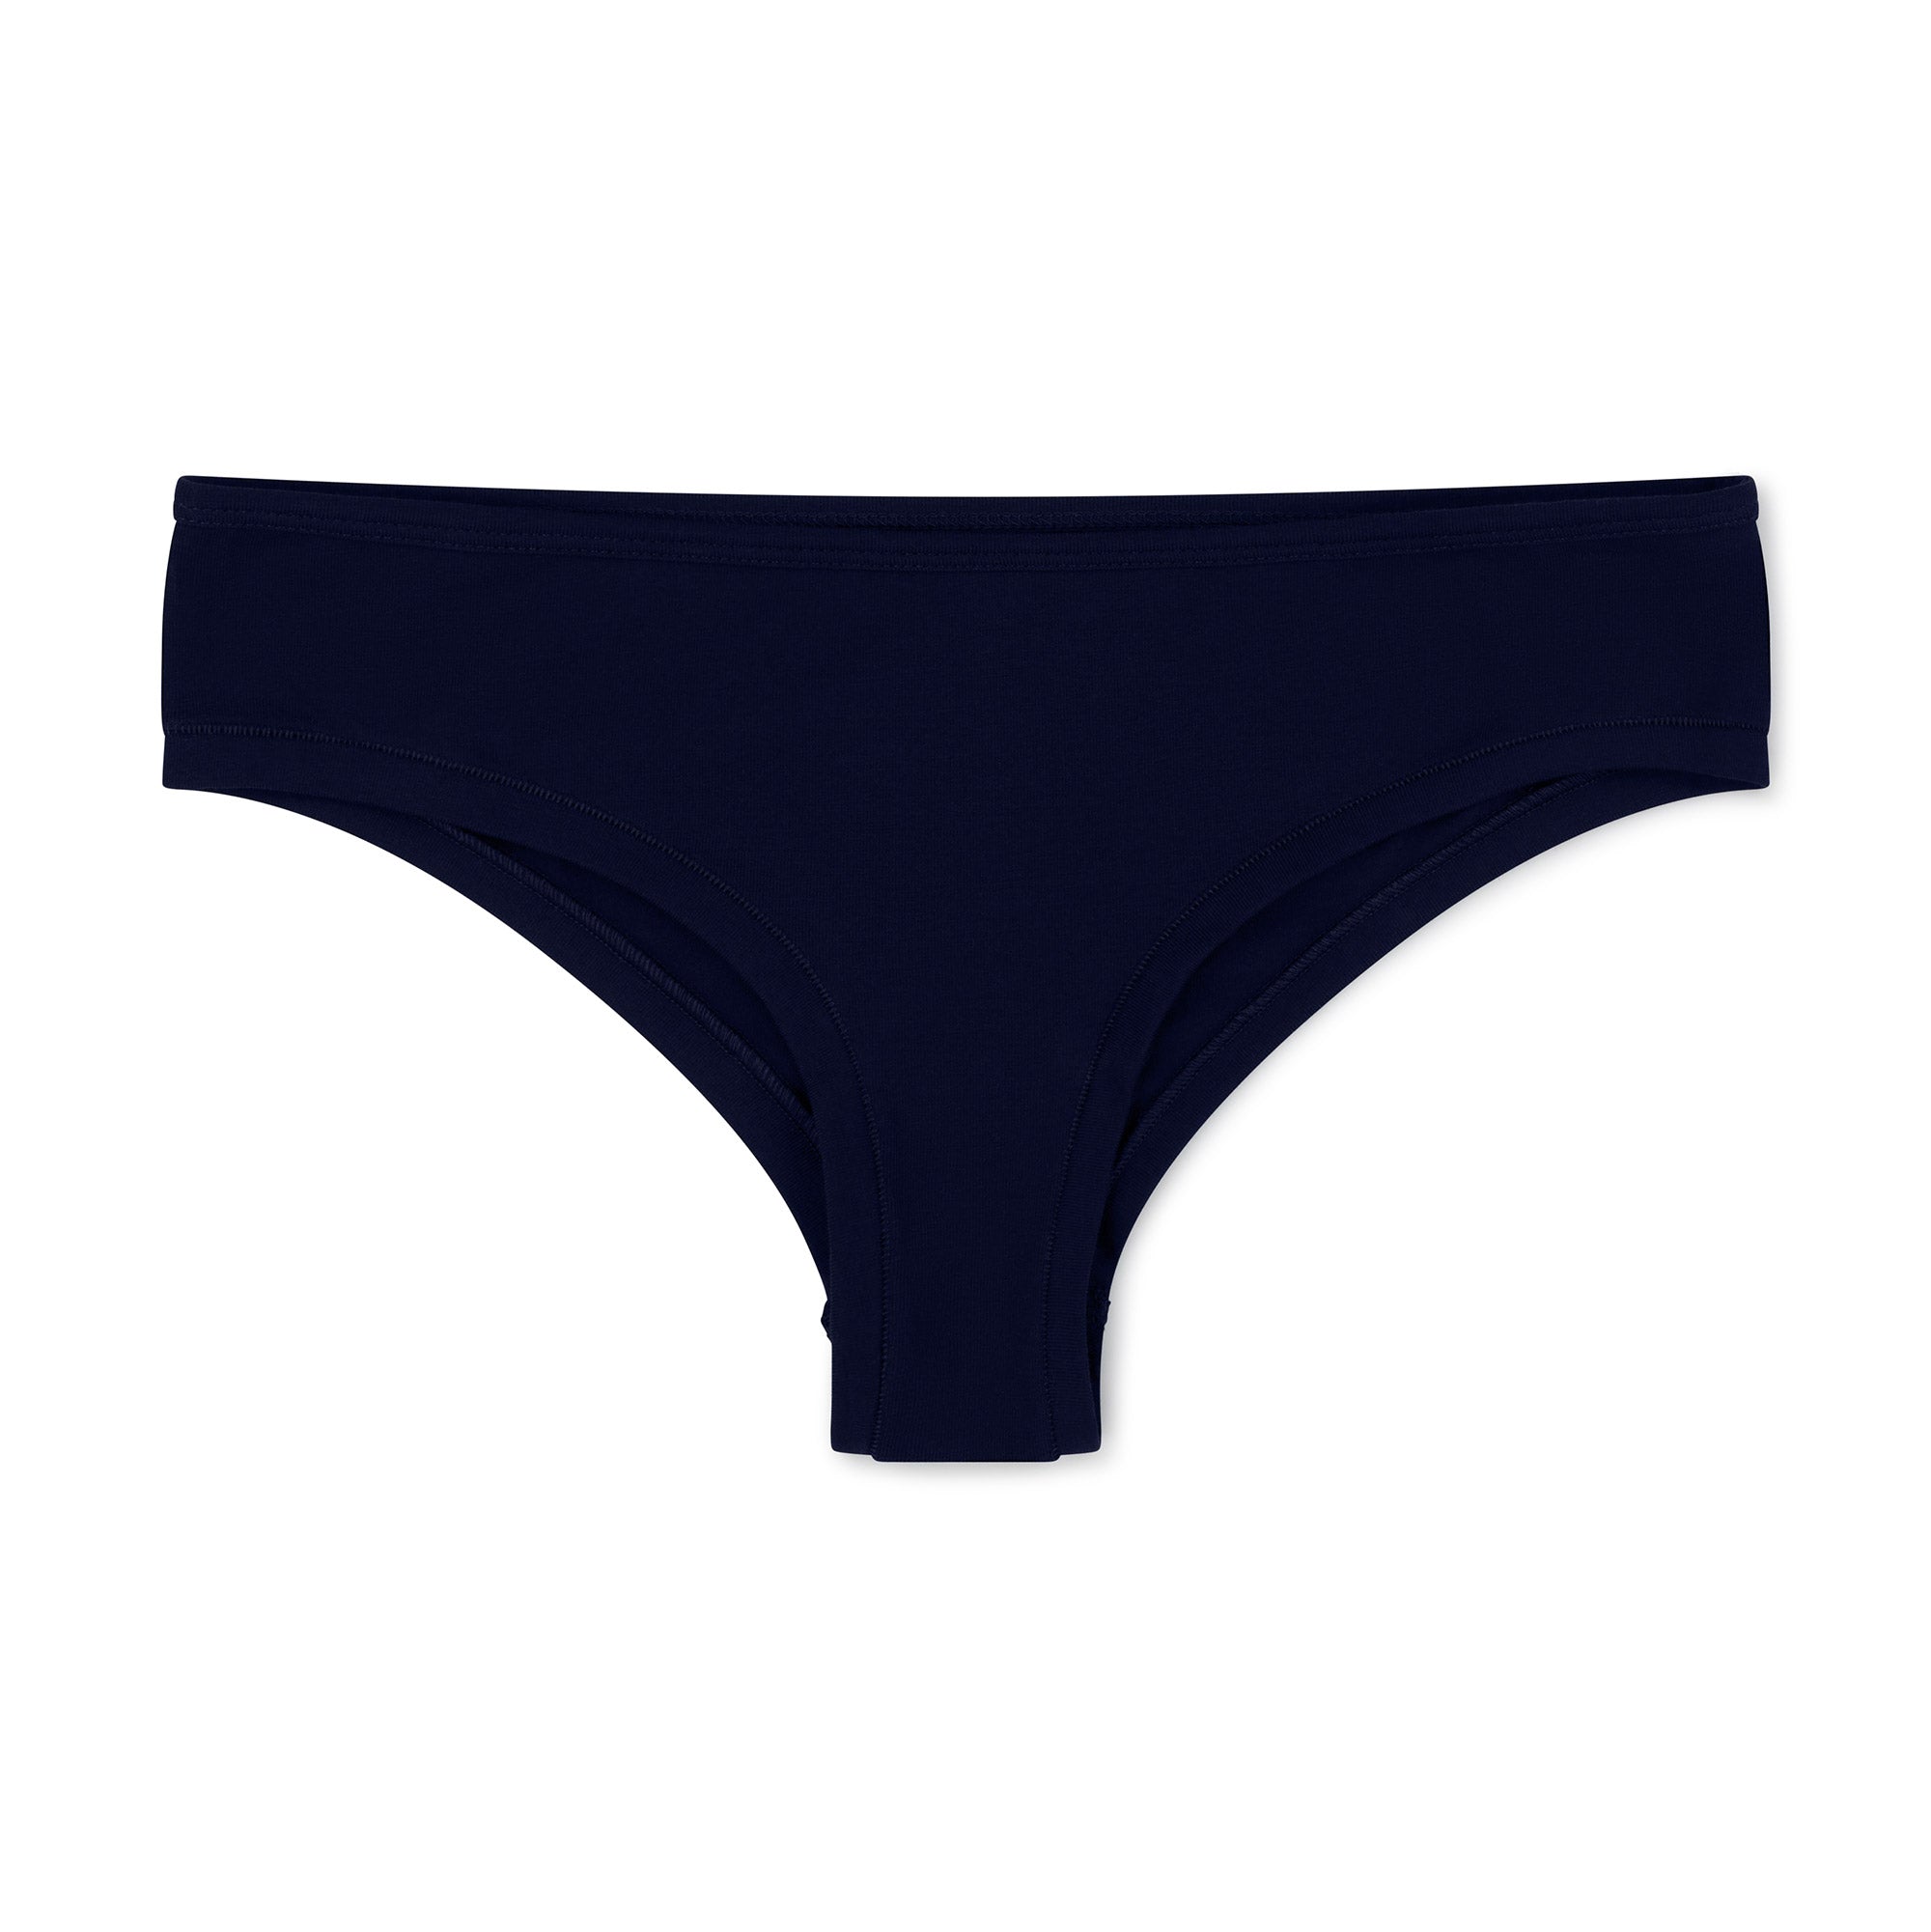 Black Organic & Recycled cotton Cheeky Fit Briefs, front facing